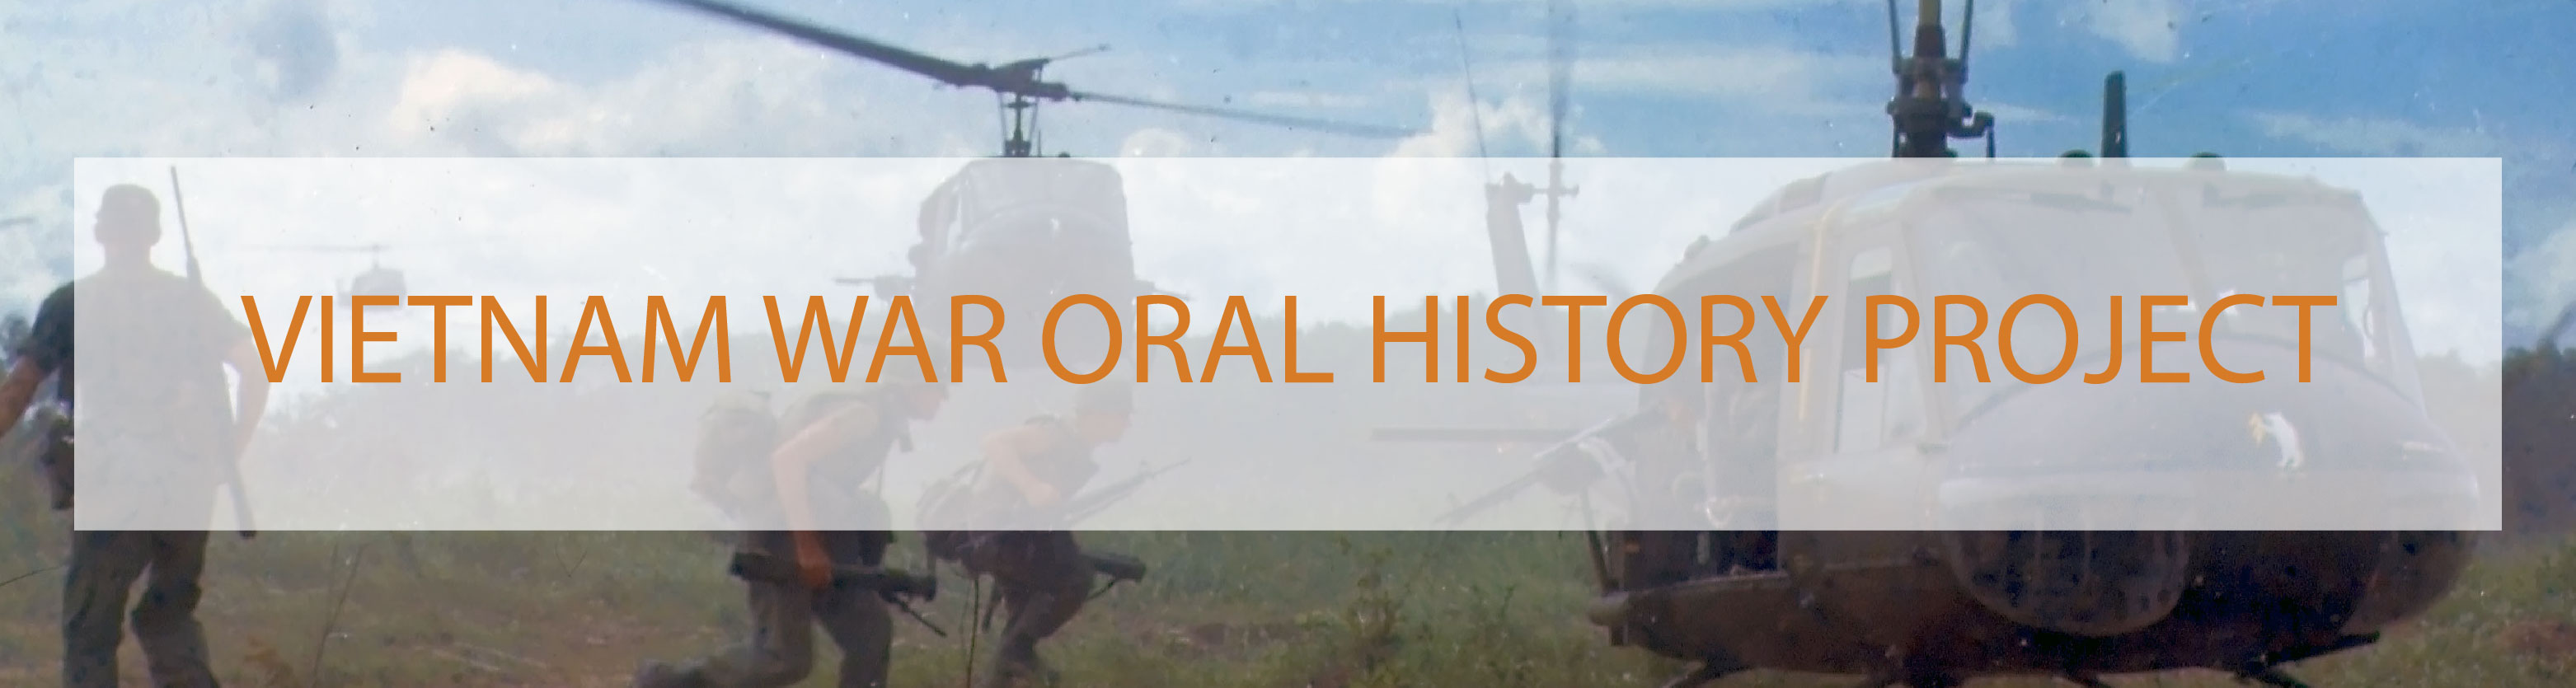 The Vietnam War Oral History Project